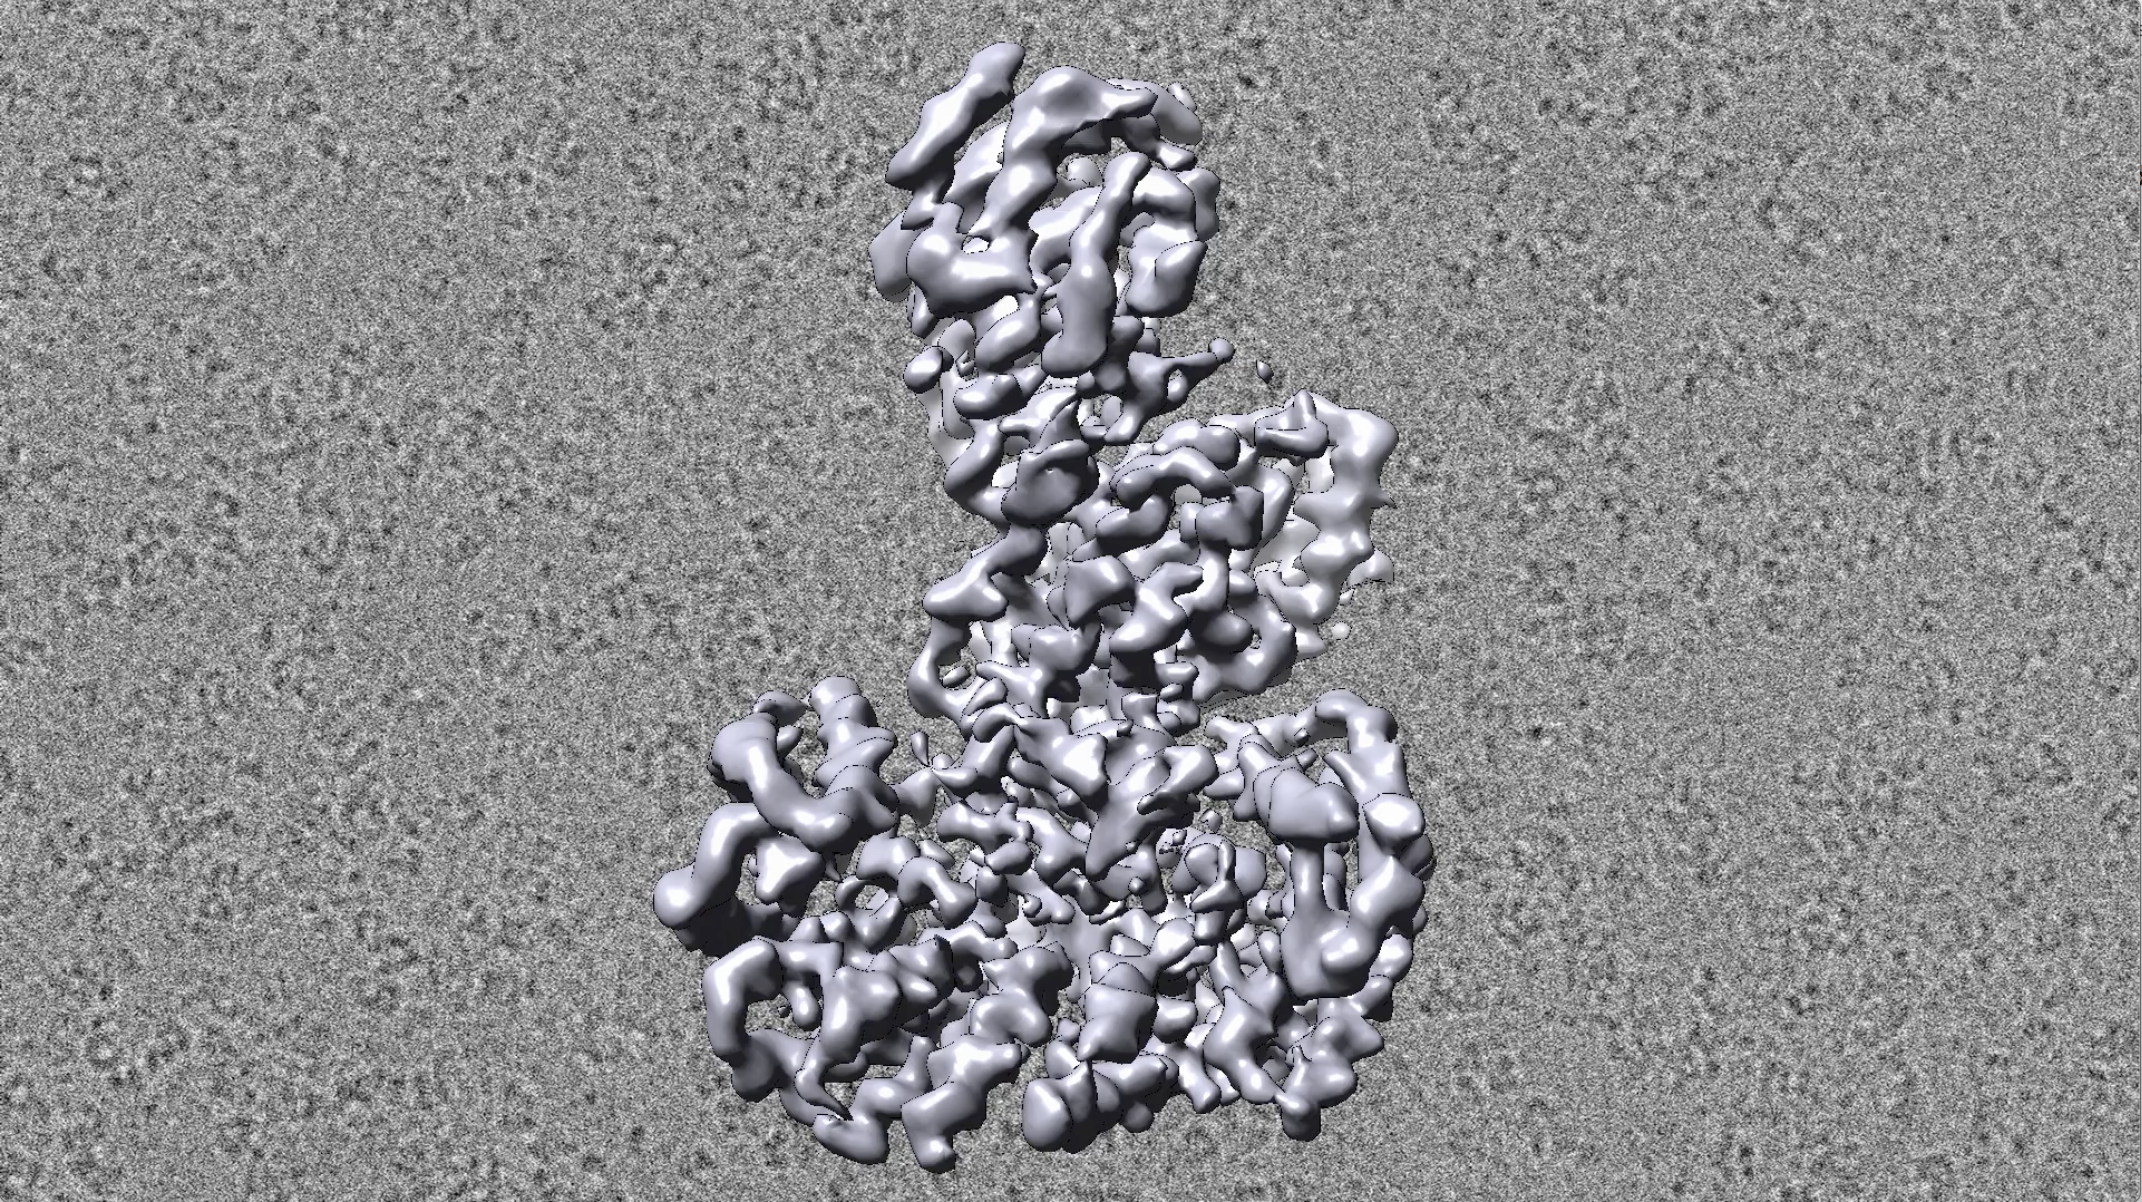 An illustration of B-Raf's structure rotates in front of a cryo-EM field of the proteins